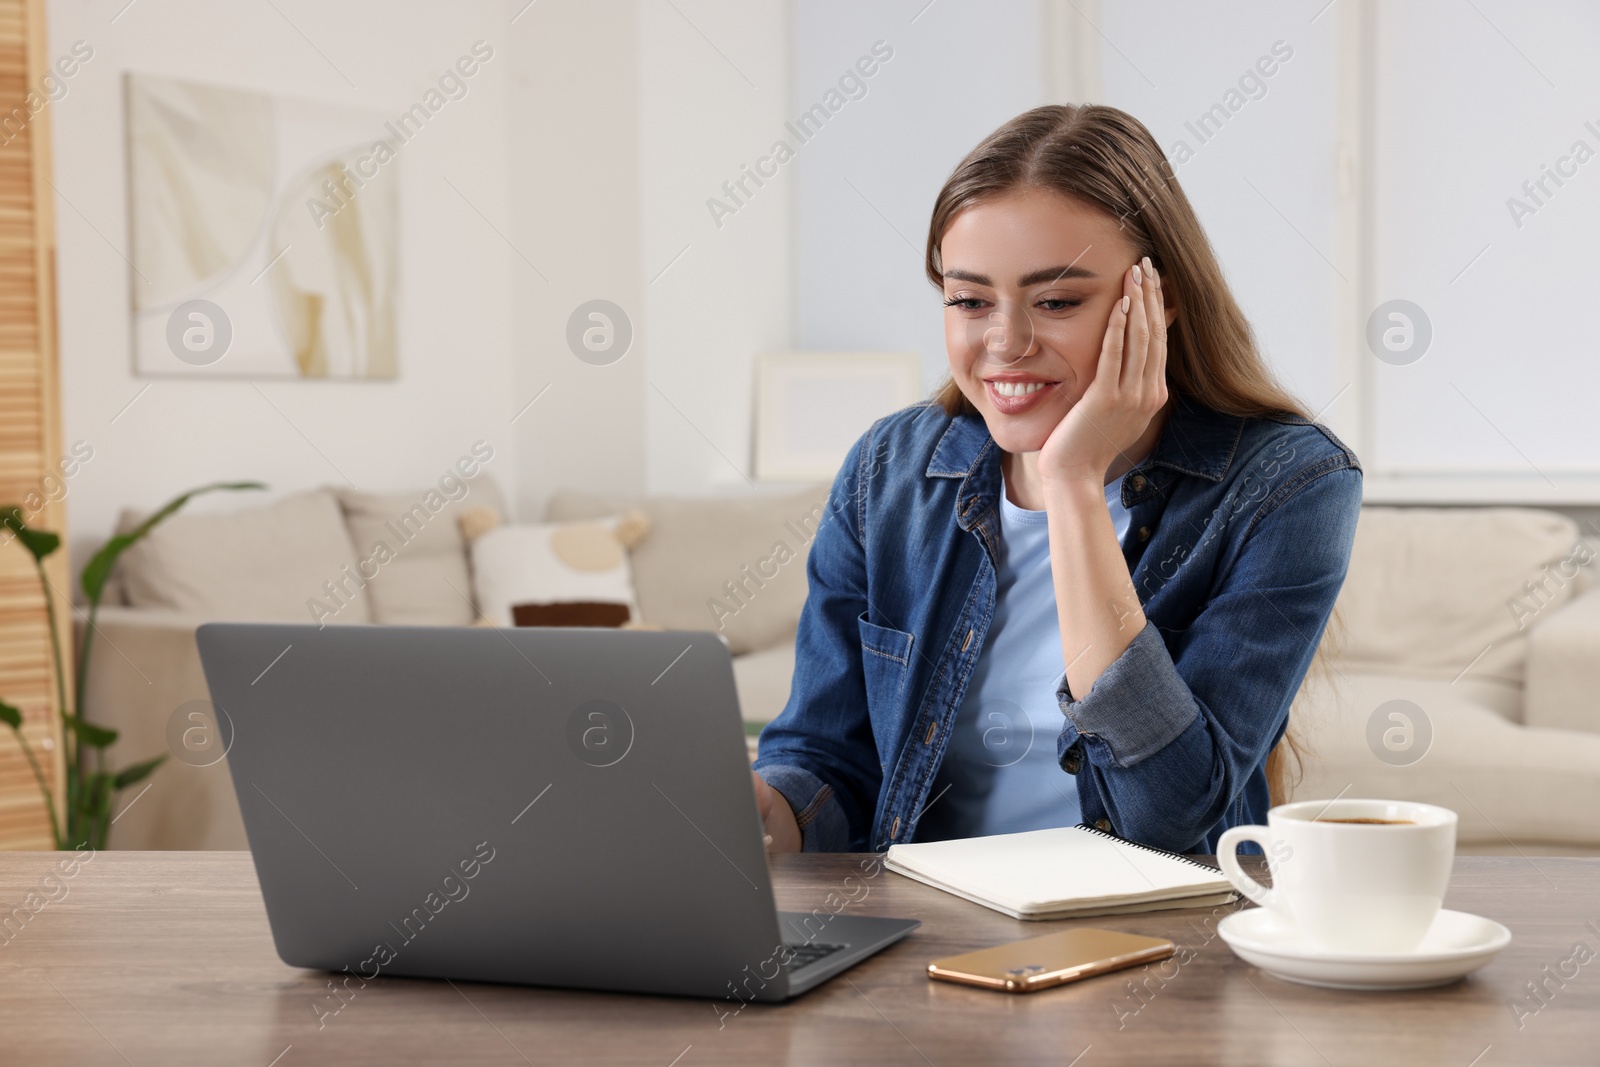 Photo of Happy woman with laptop at wooden table in room